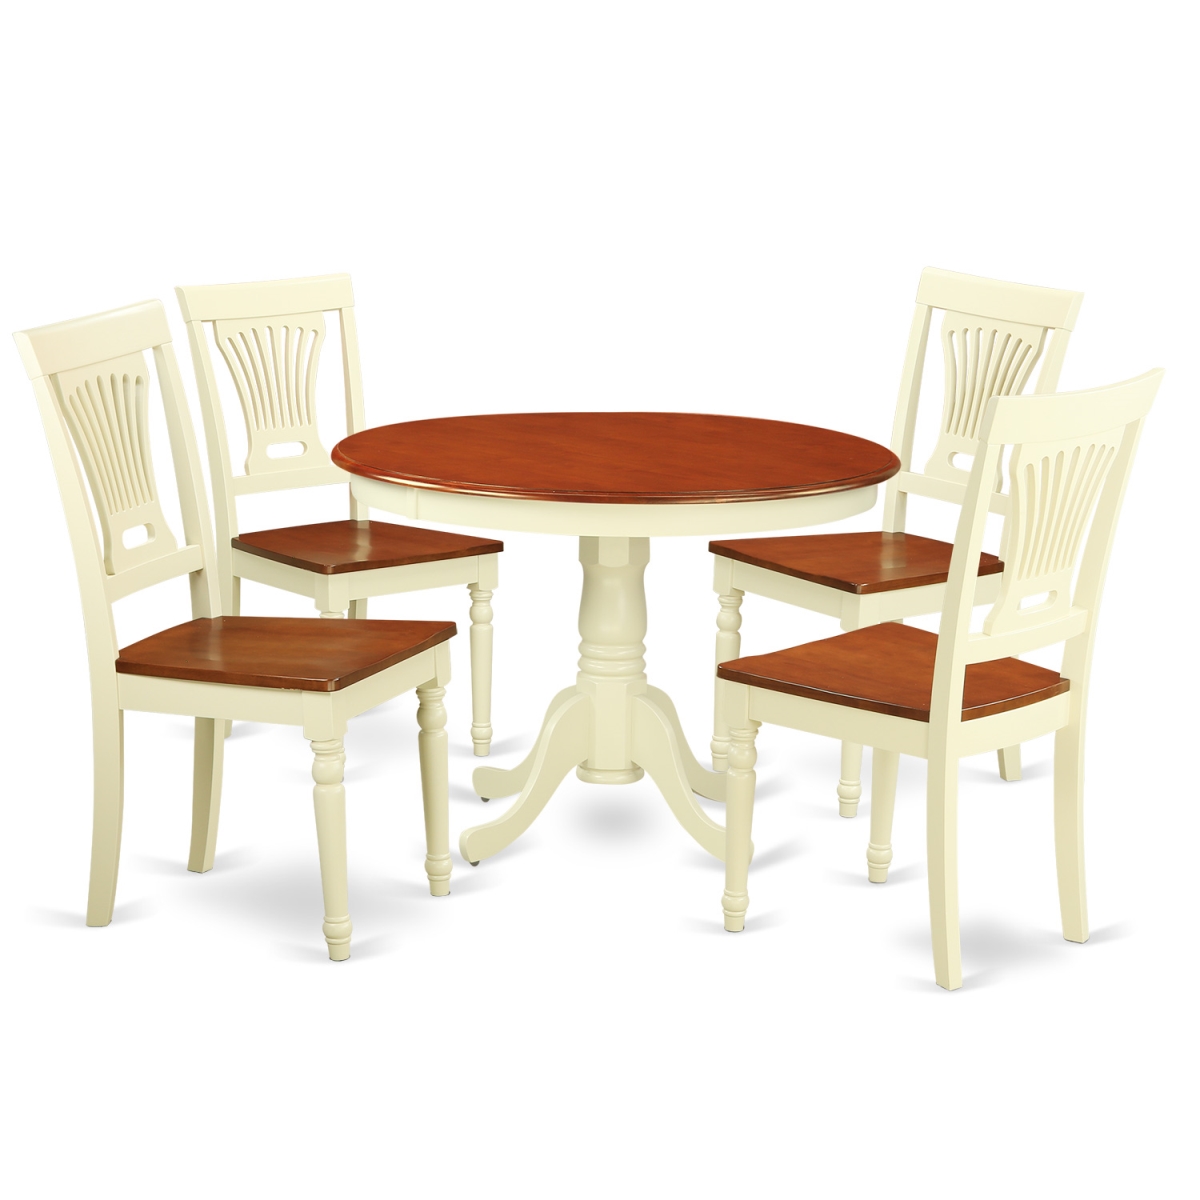 Picture of East West Furniture HLPL5-BMK-W Wood Seat Dining Set - One Round Small Table & 4 Chairs with Buttermilk & Cherry - 5 Piece - 42 in.